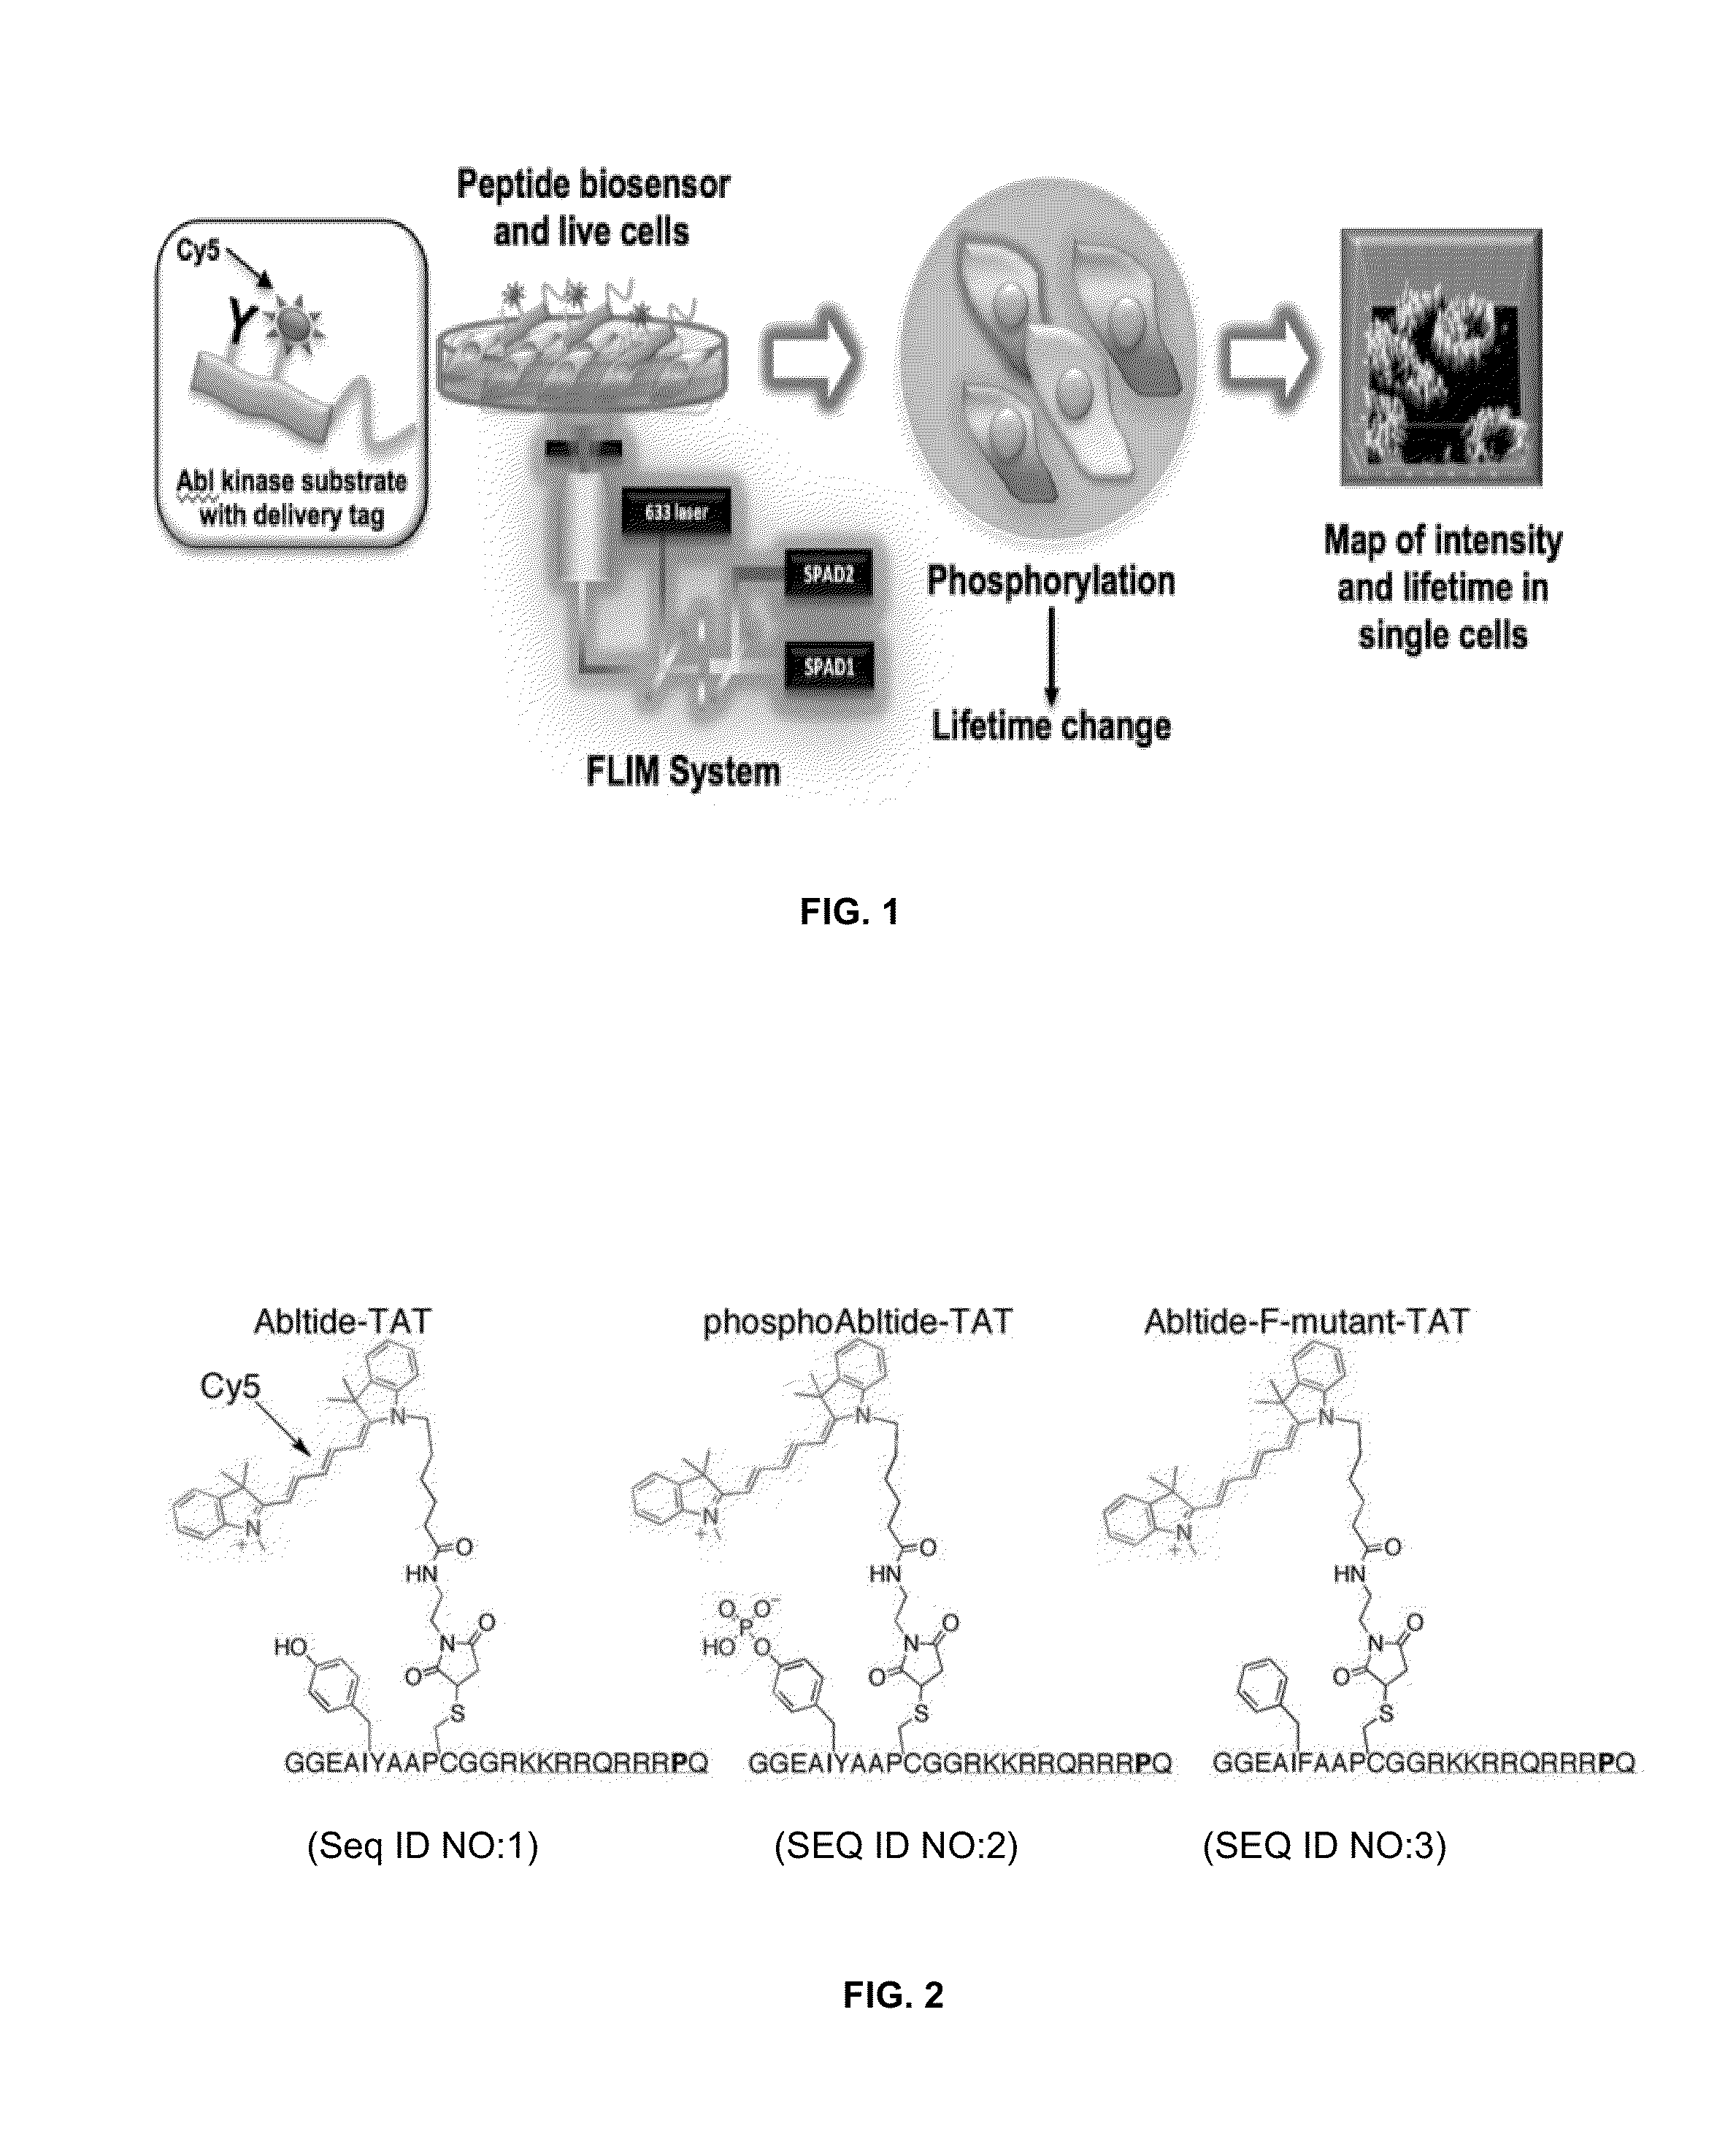 Methods for detecting enzyme activity using fluorescence lifetime imaging